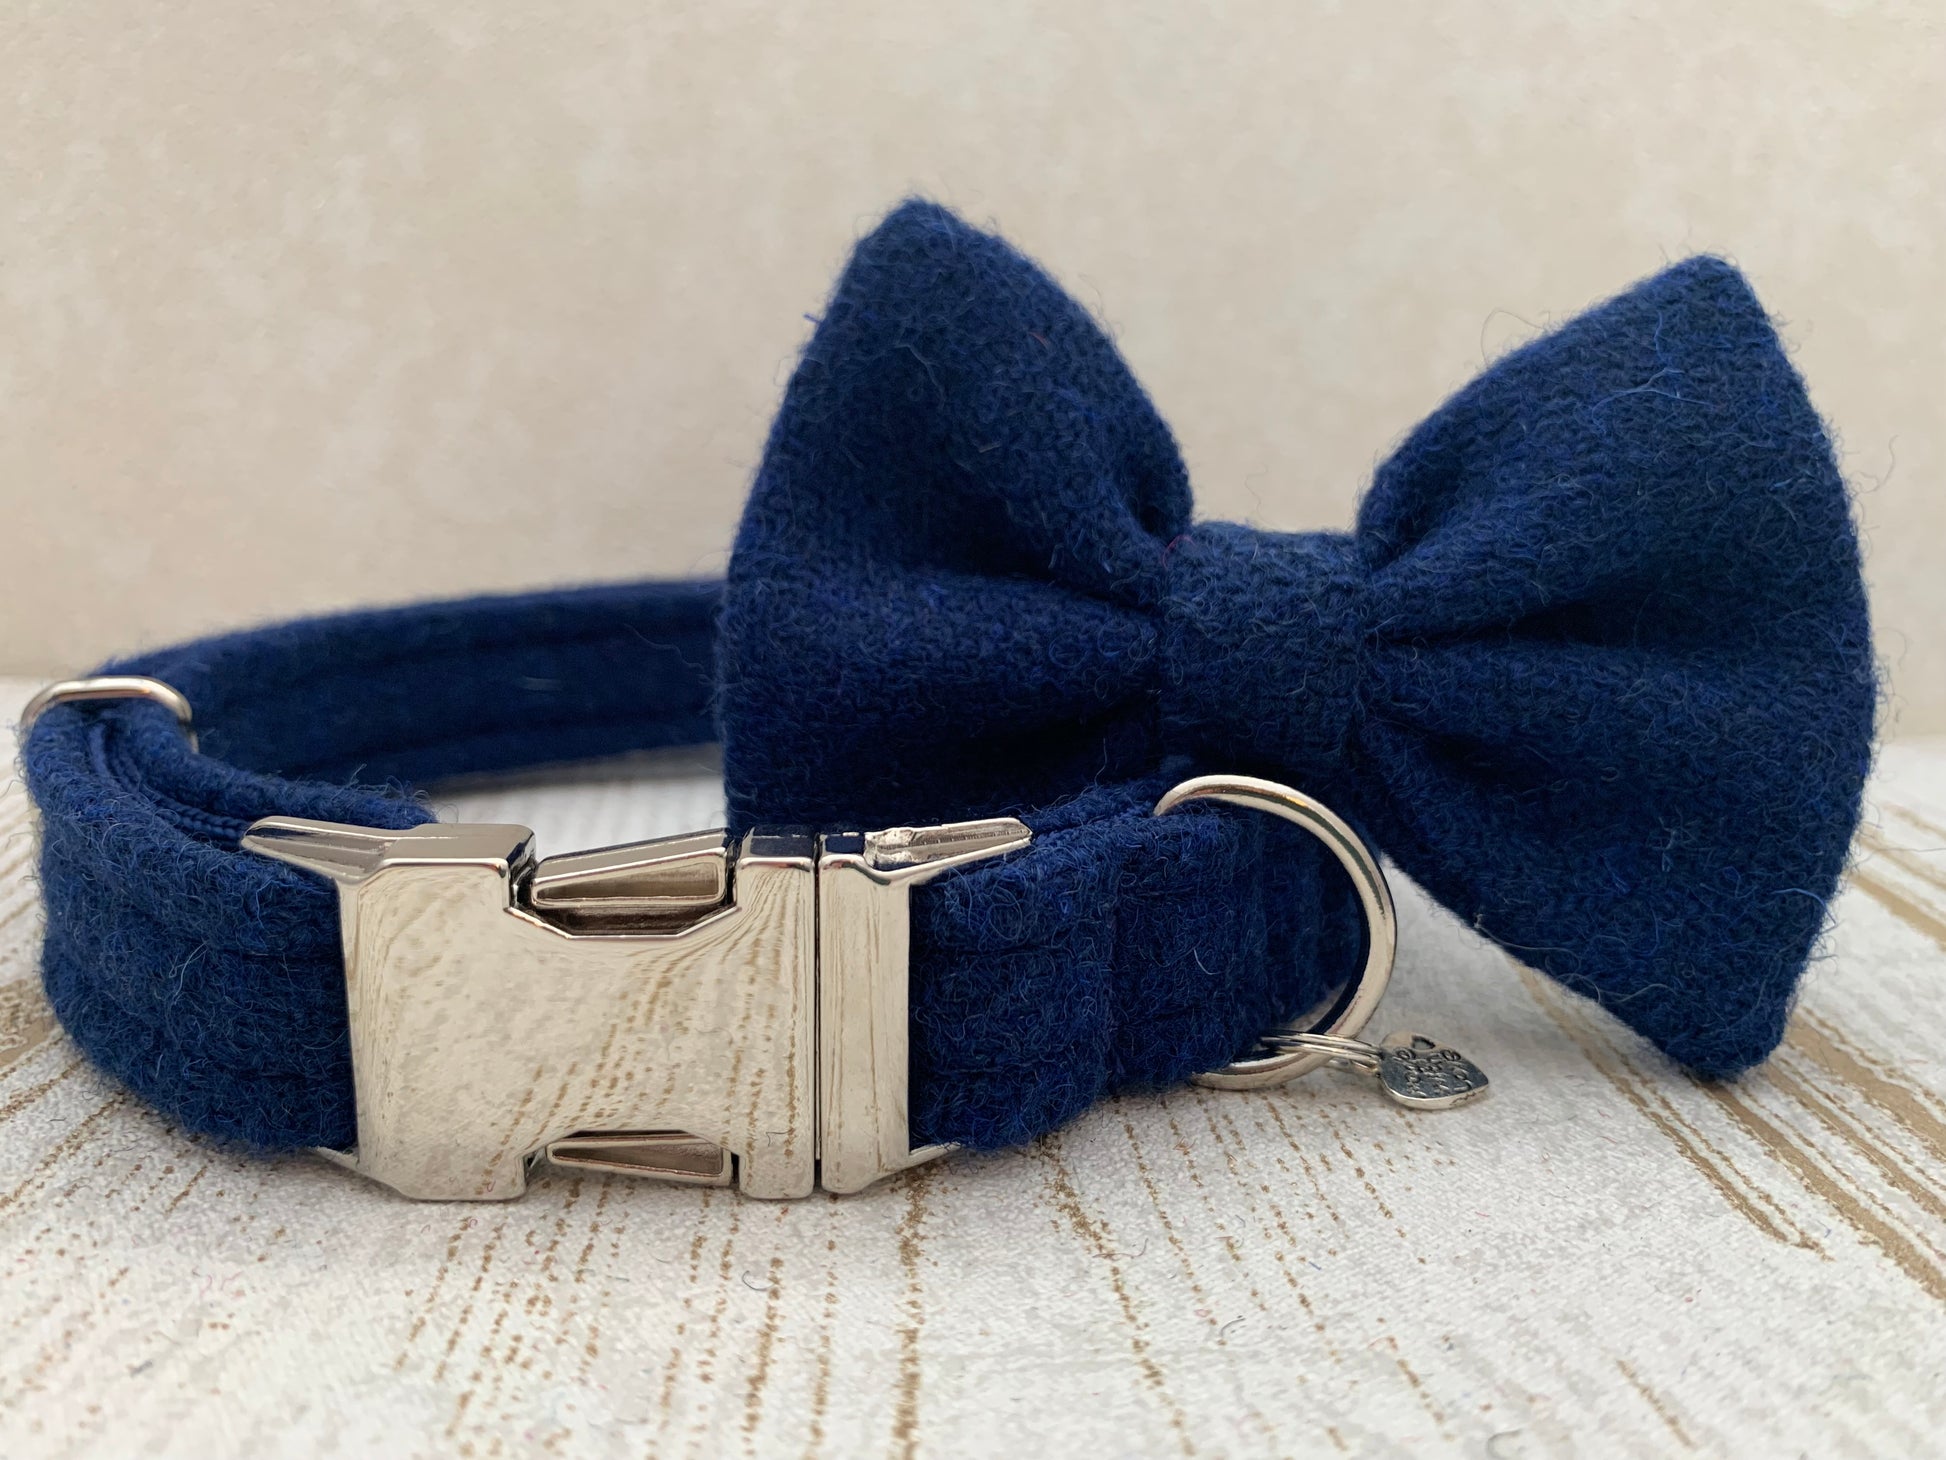 (Balmoral) Harris Tweed Bow Tie Dog Collar - Blue (with Silver Findings) - BOWZOS